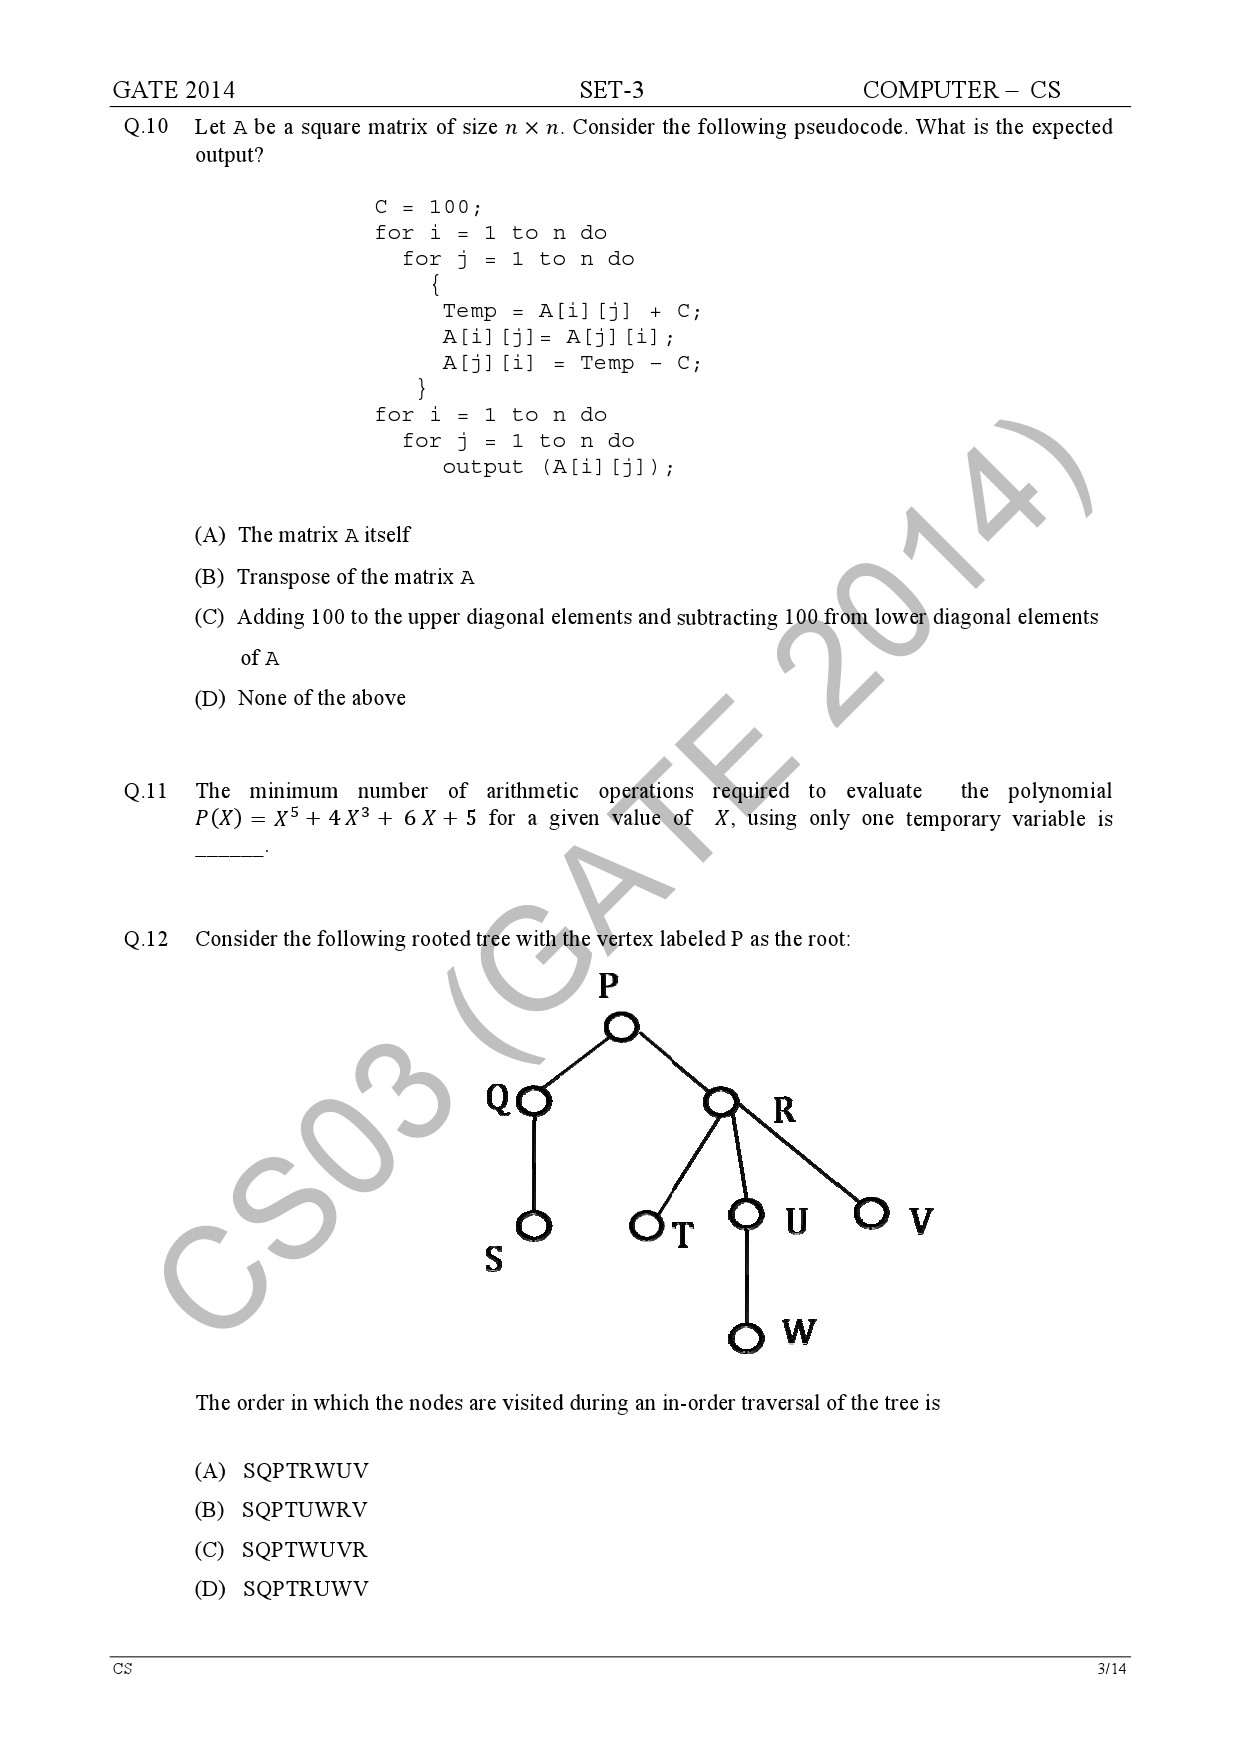 GATE Exam Question Paper 2014 Computer Science and Information Technology Set 3 9